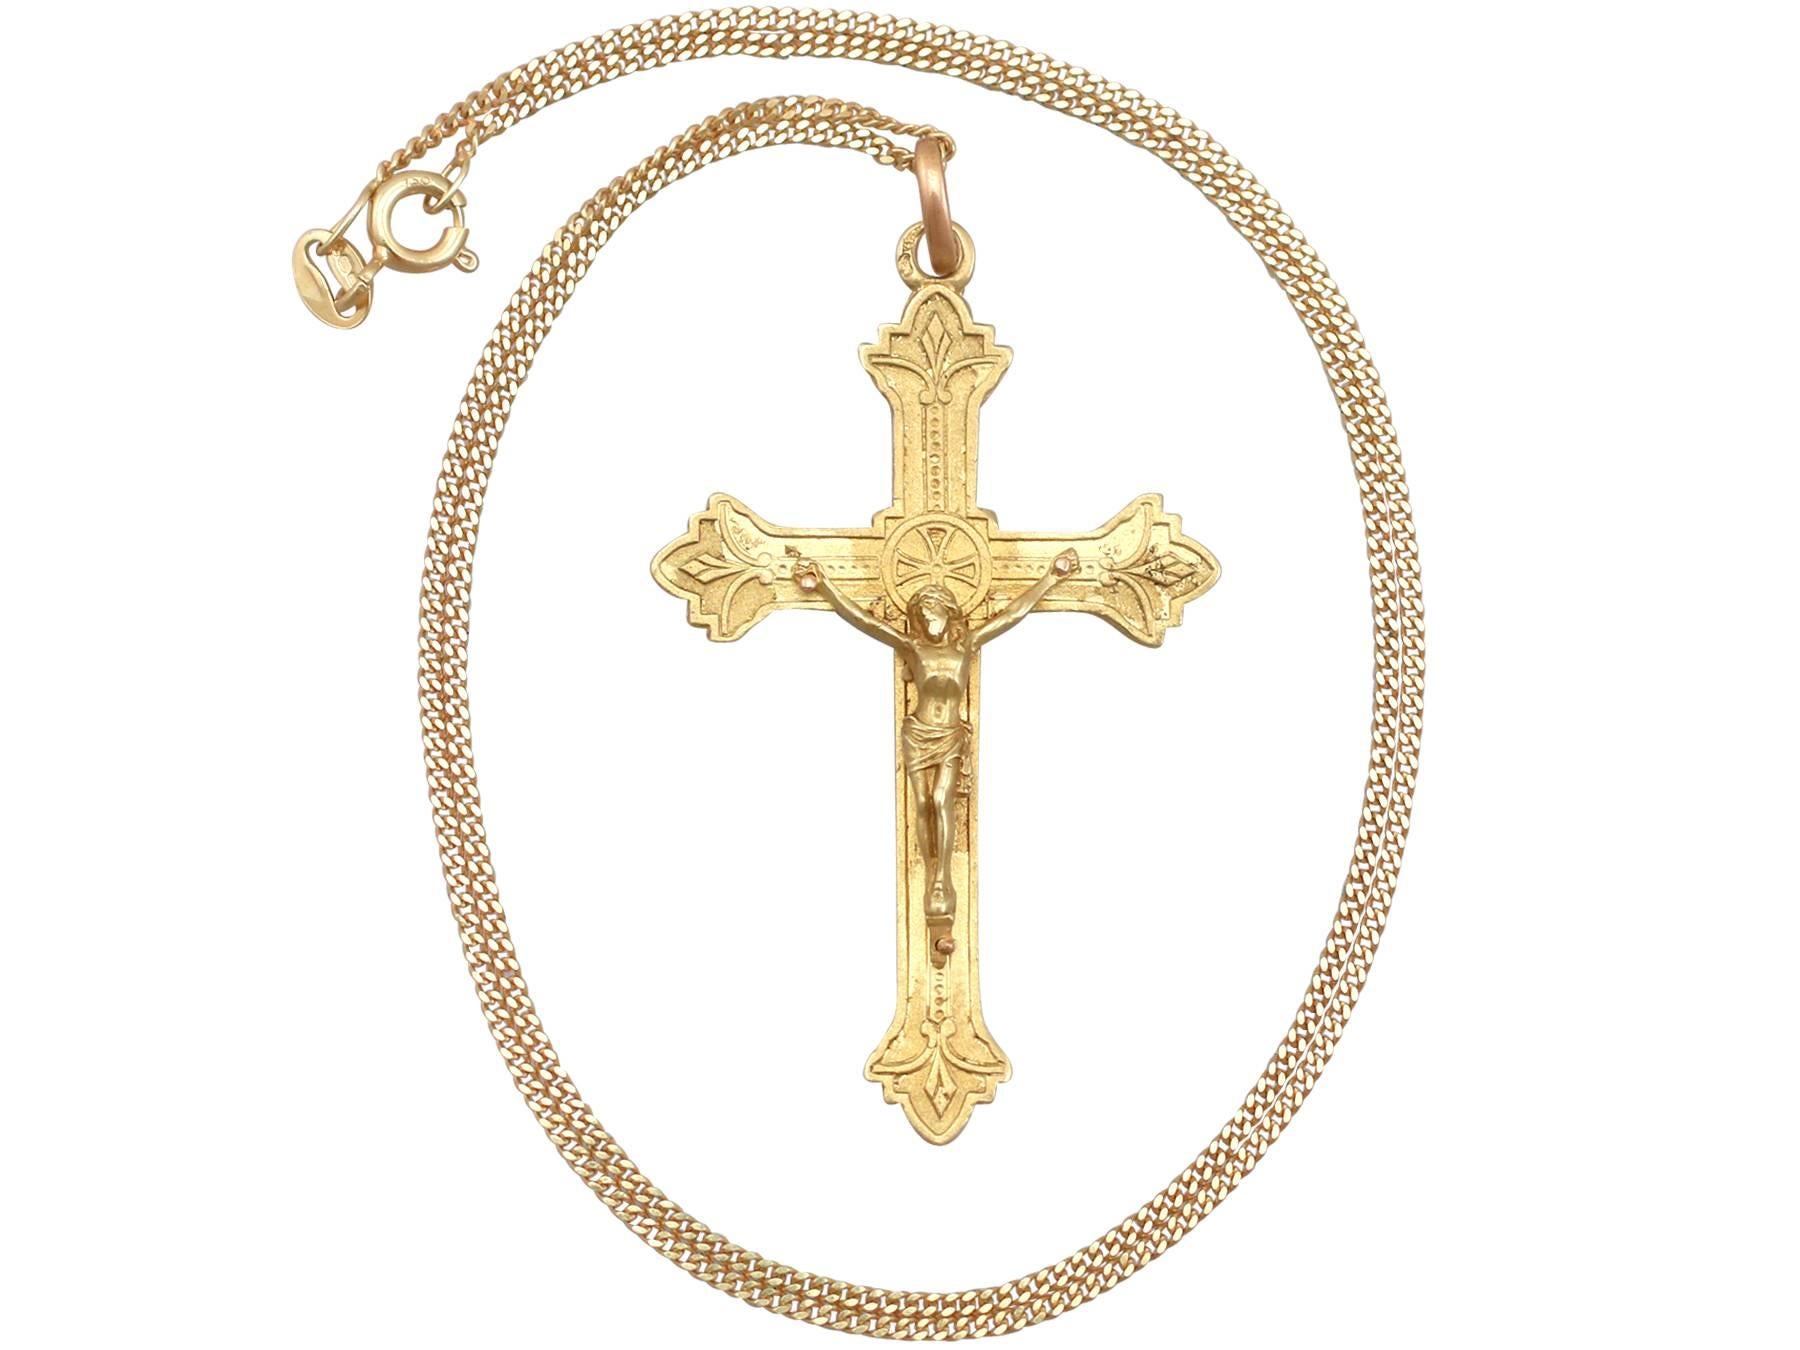 An impressive antique French 18 karat yellow gold crucifix and chain; part of our diverse antique jewelry and estate jewelry collections

This fine and impressive antique pendant has been crafted in 18k yellow gold.

The antique yellow gold cross